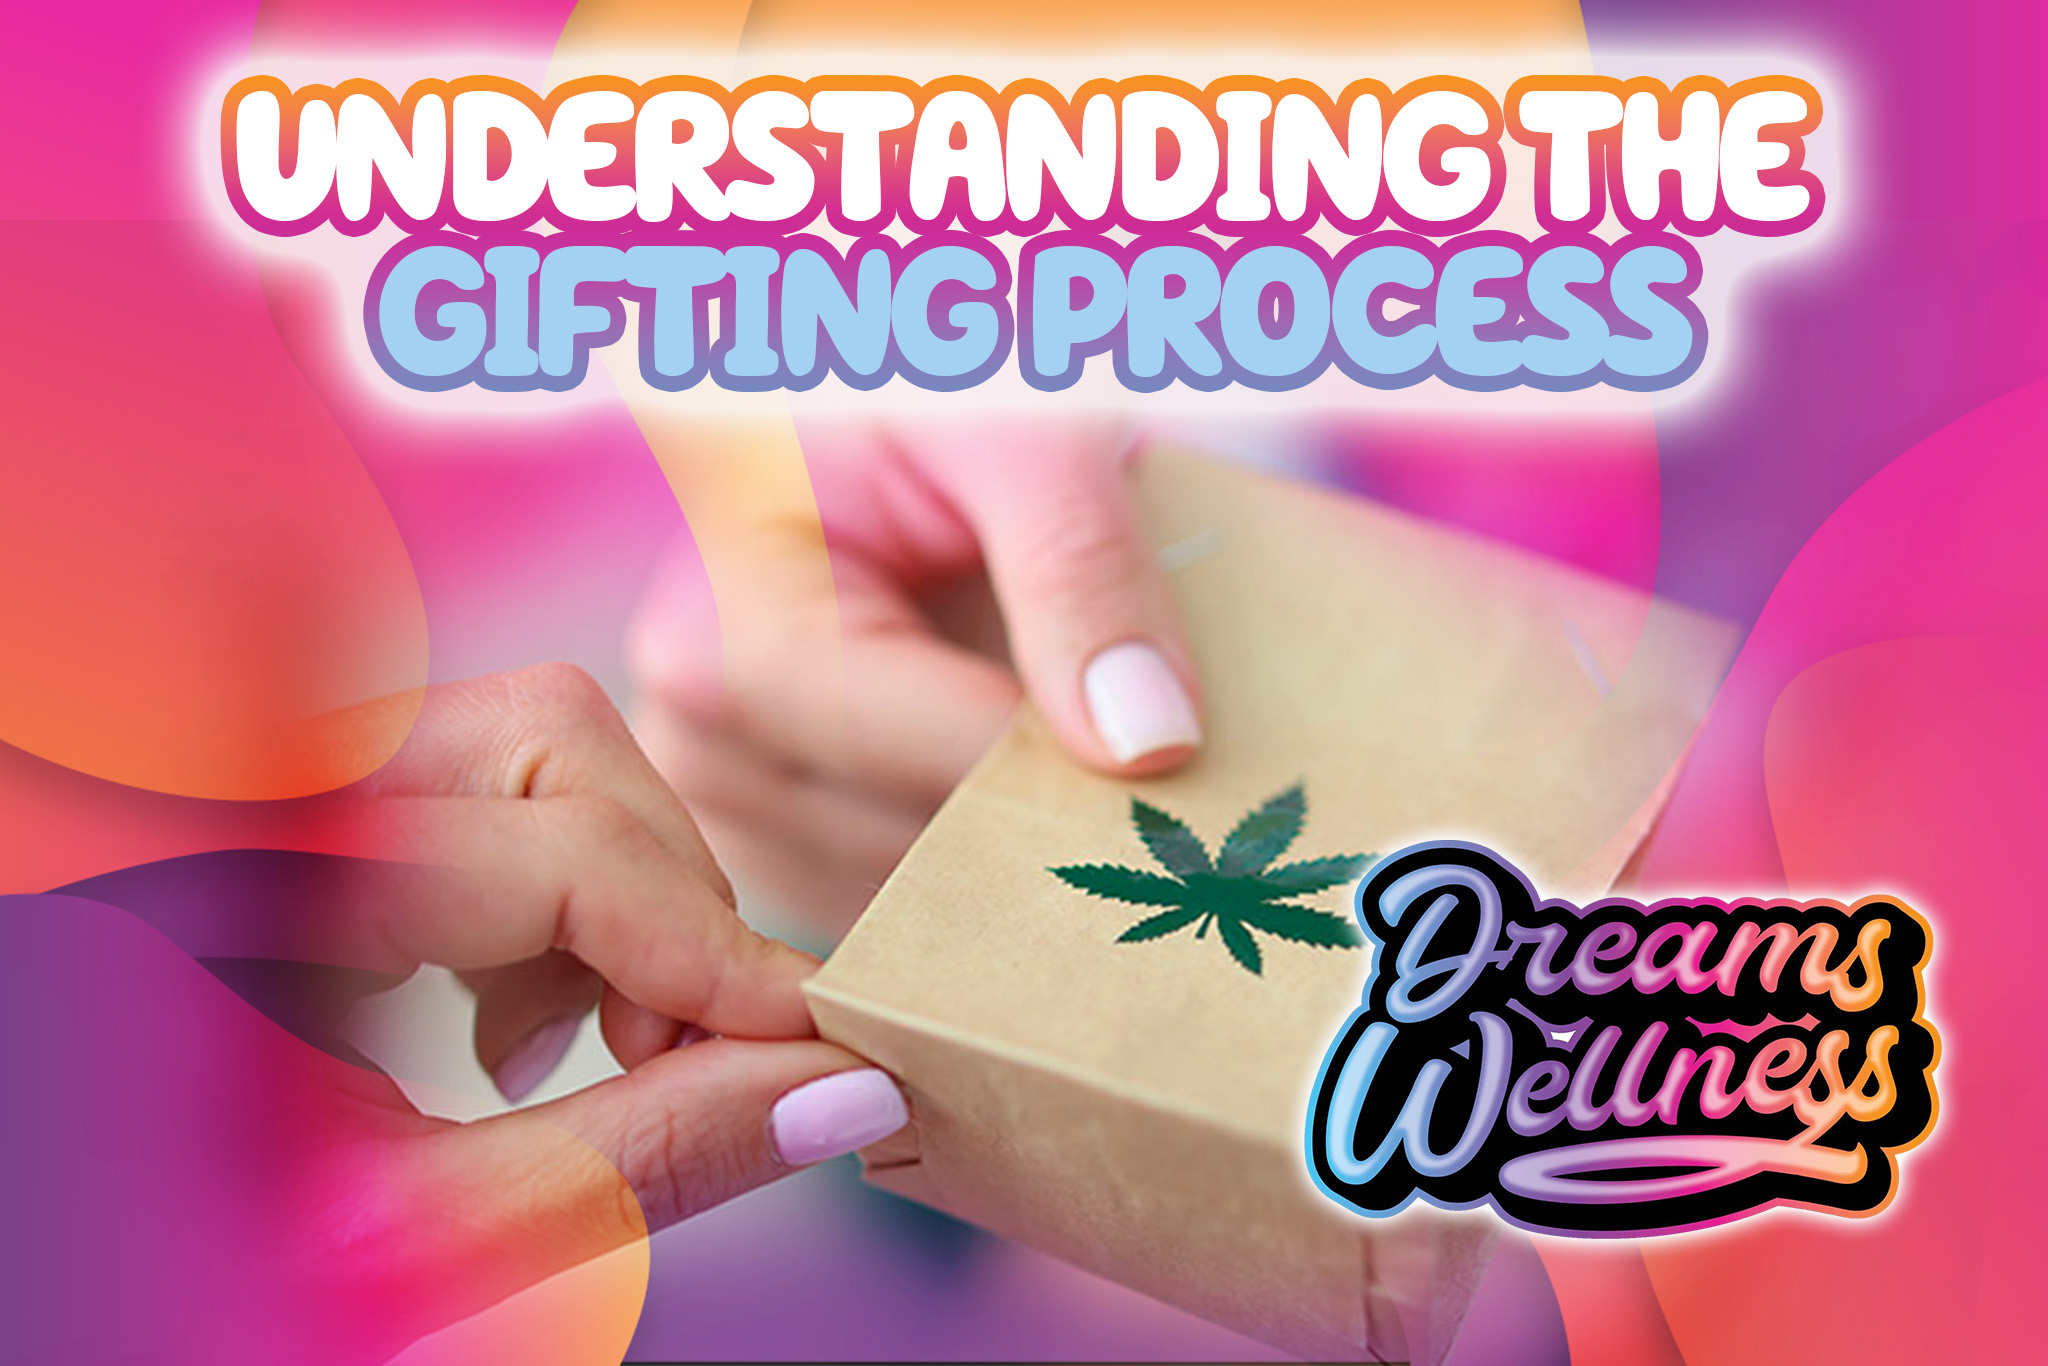 understanding the gifting process